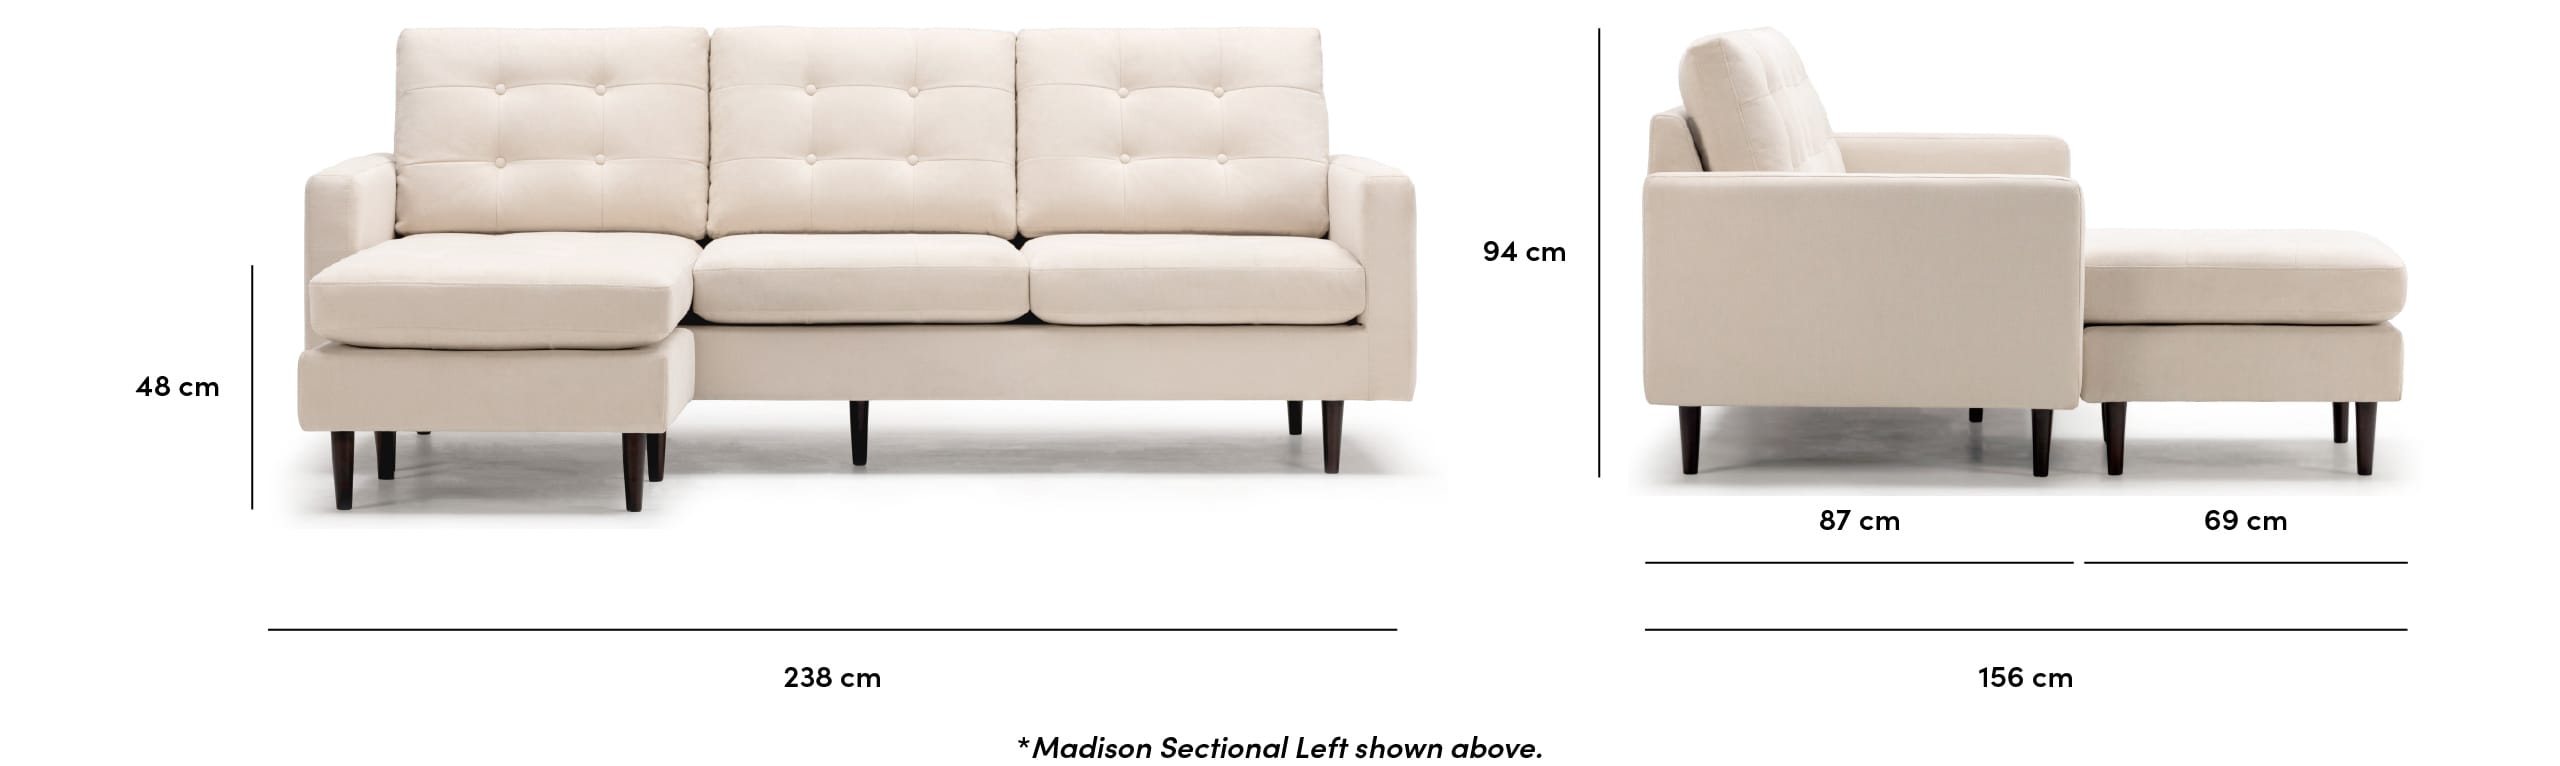 Madison sectional dimensions